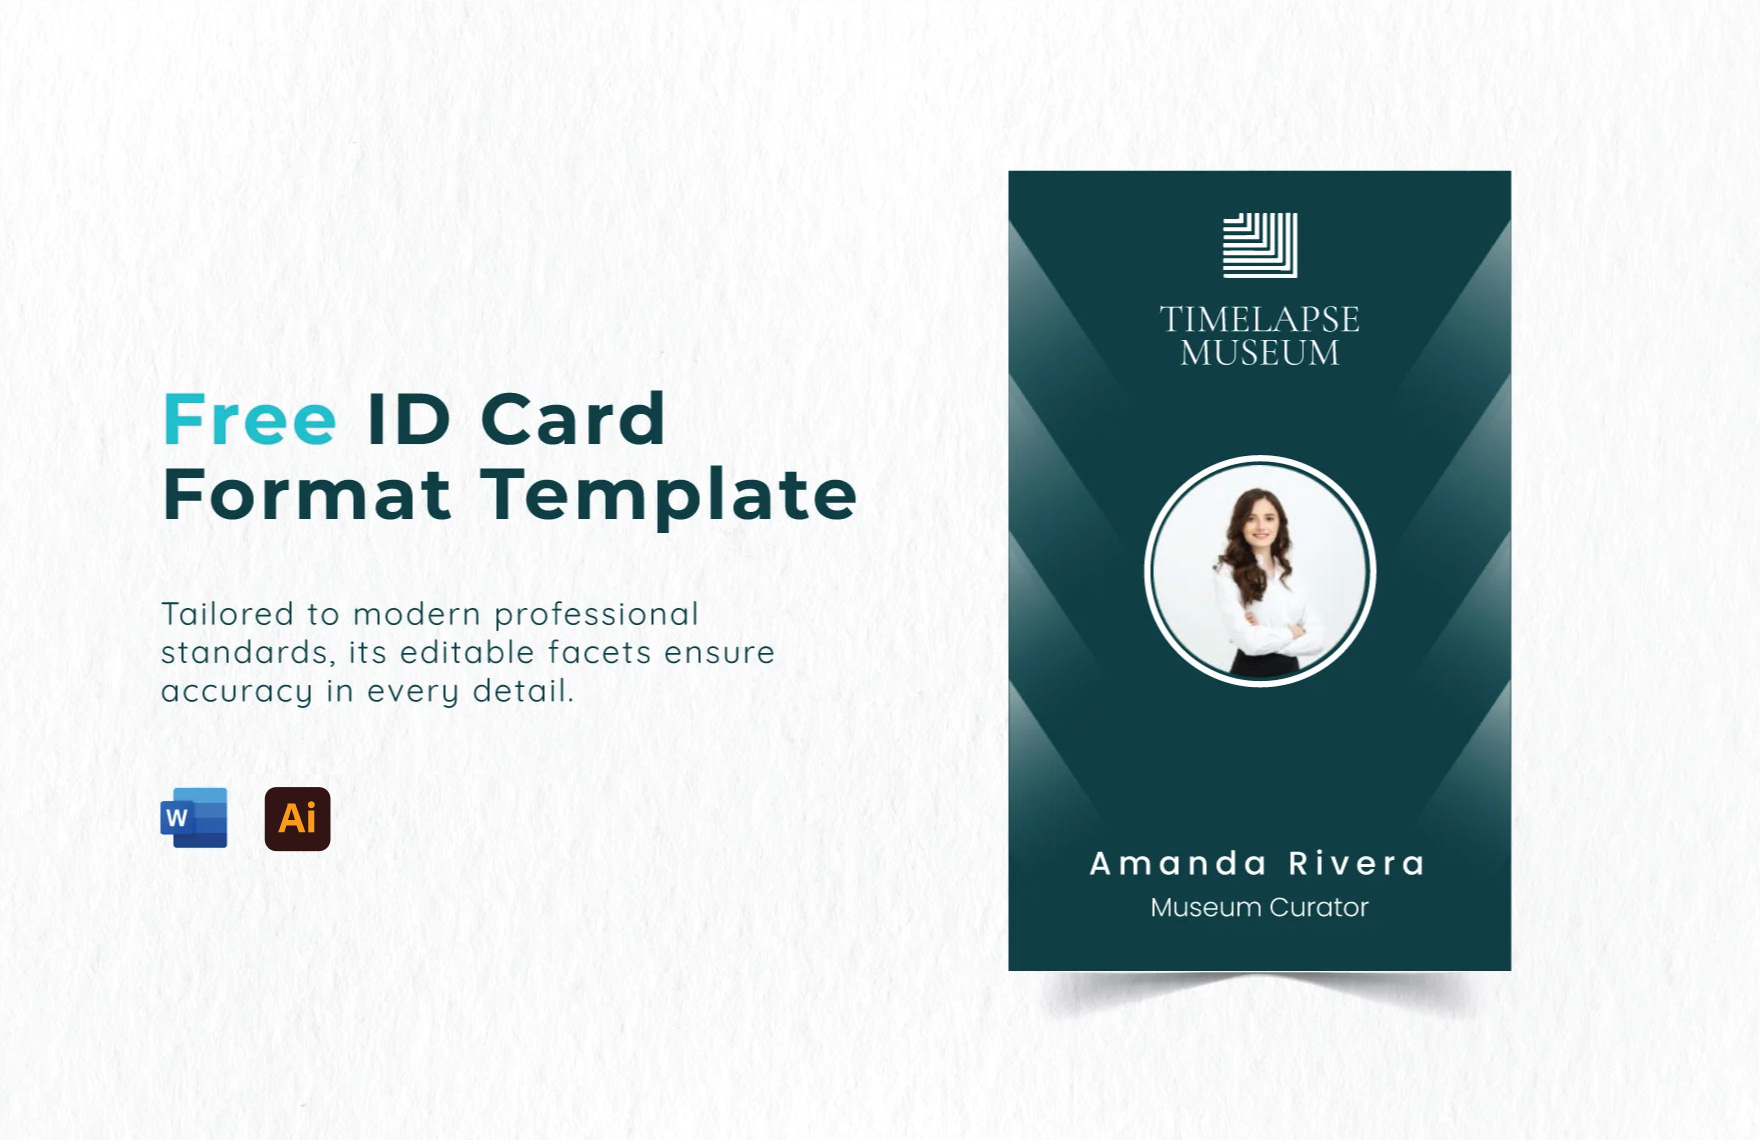 Free ID Card Format Template